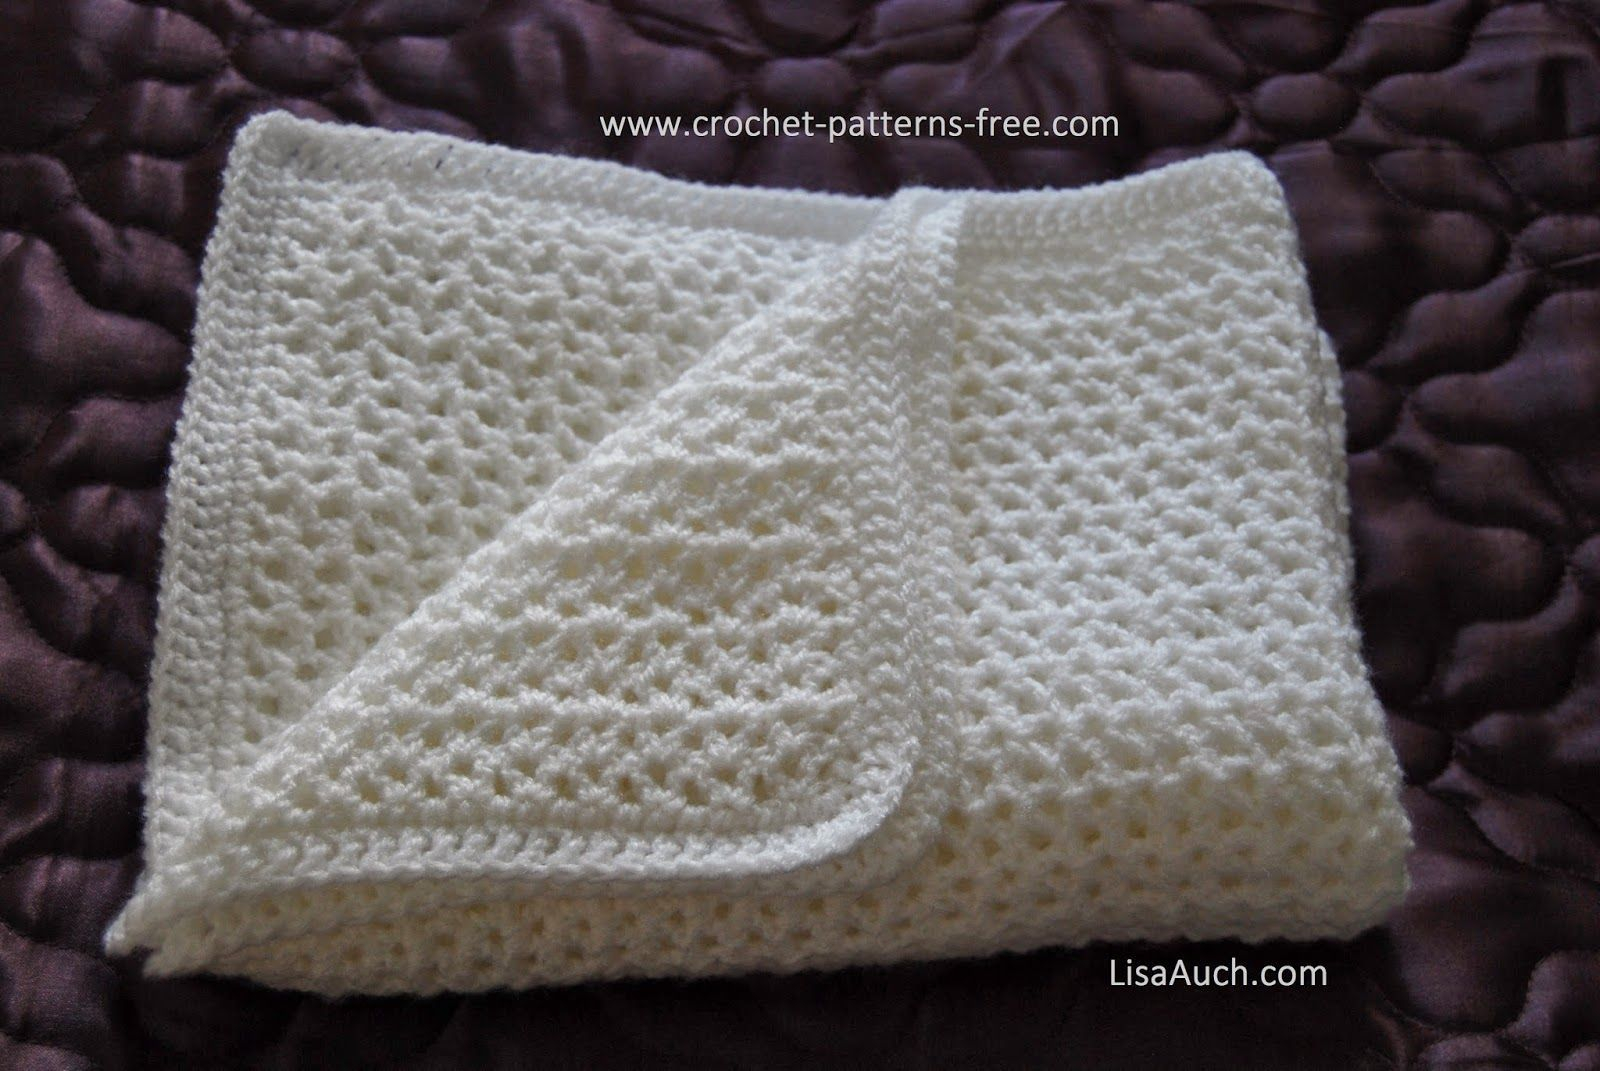 Free Baby Afghan Crochet Patterns How To Crochet An Easy Ba Blanket Ideal For Beginners Free